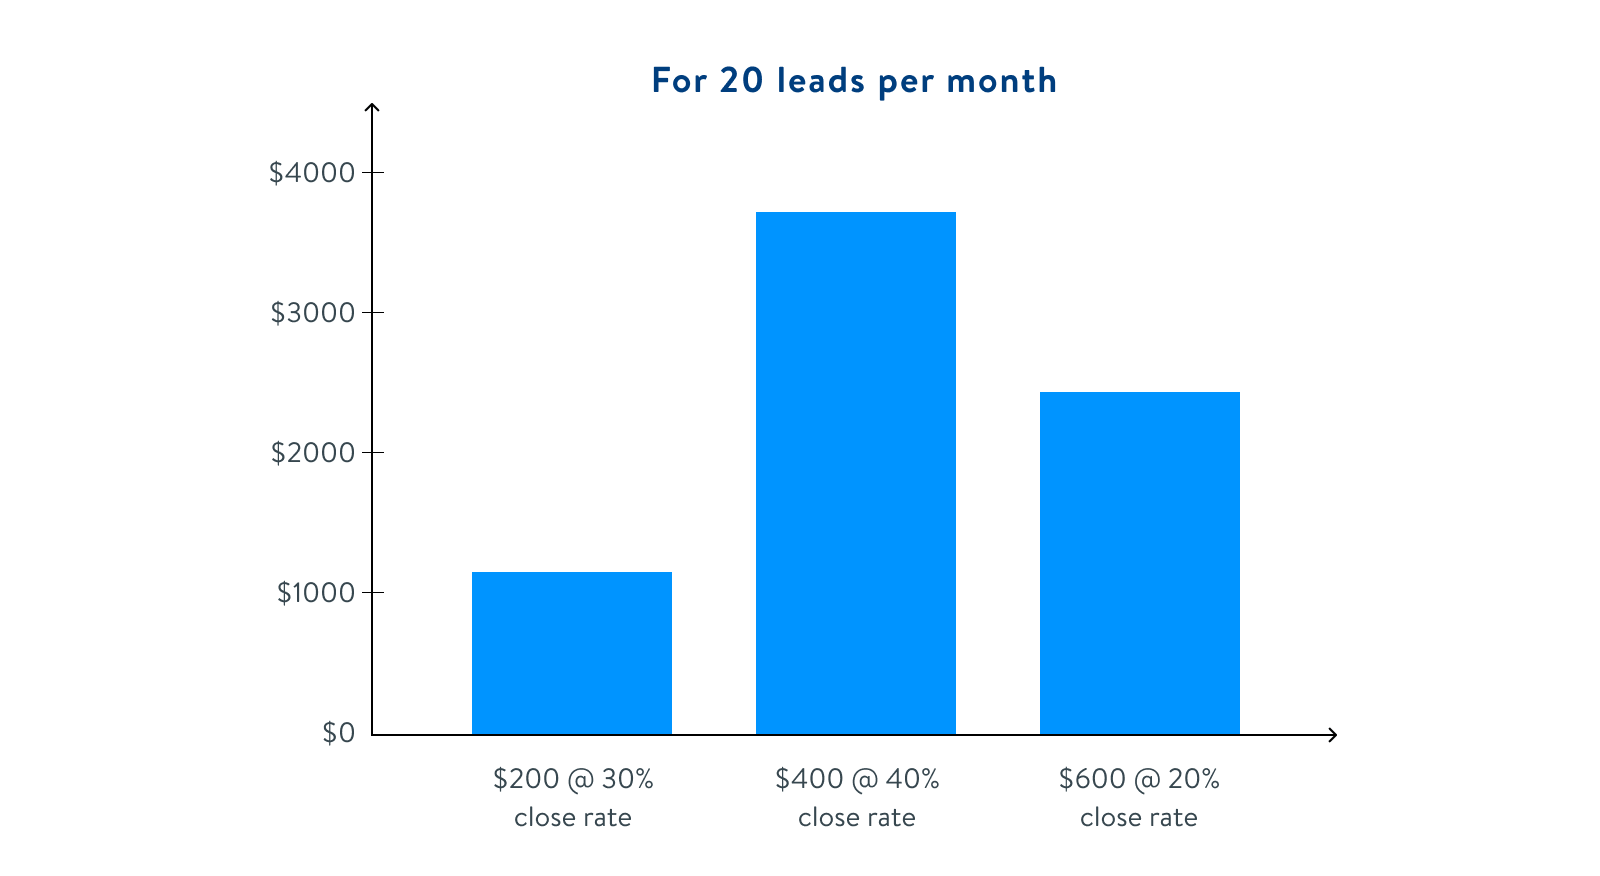 For 20 Leads per Month: $200 at 30% close rate; $400 at 40% close rate; $600 at 20% close rate.